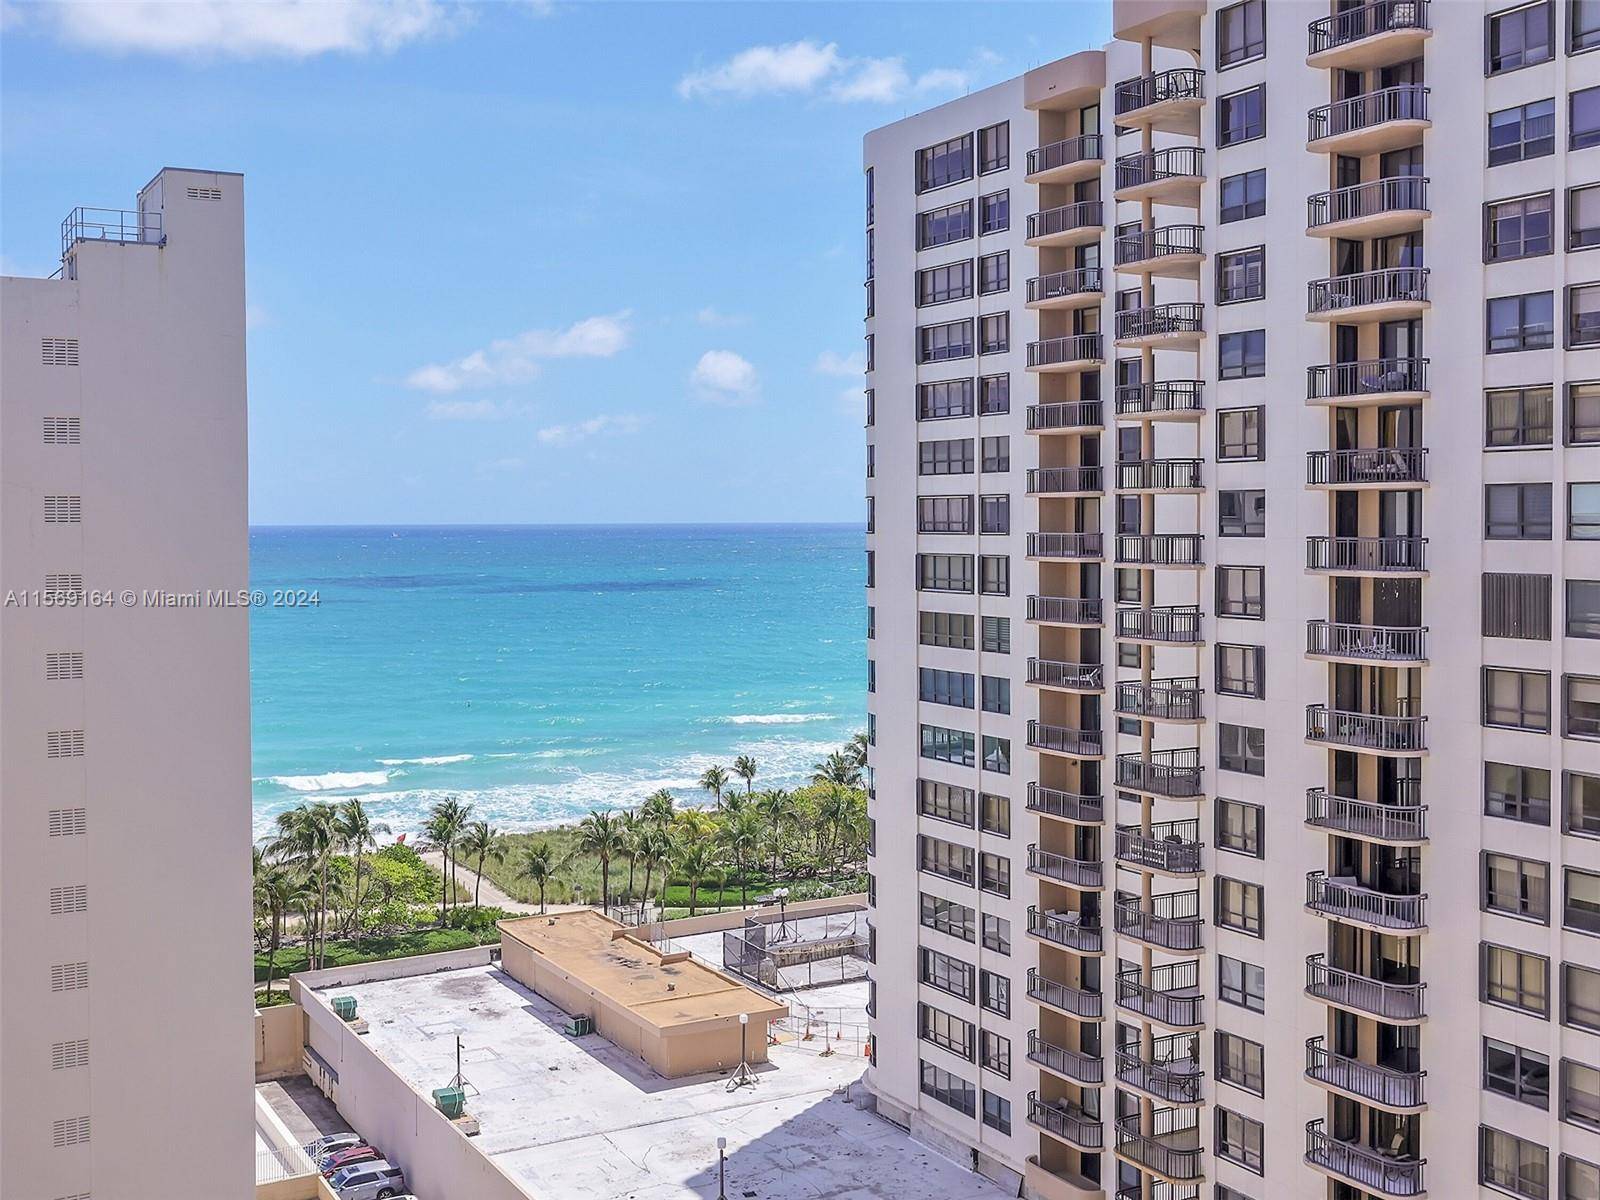 This rarely available, southeast facing, 09 Line at The Plaza of Bal Harbour has the best balcony and one of the largest floor plans in the building.